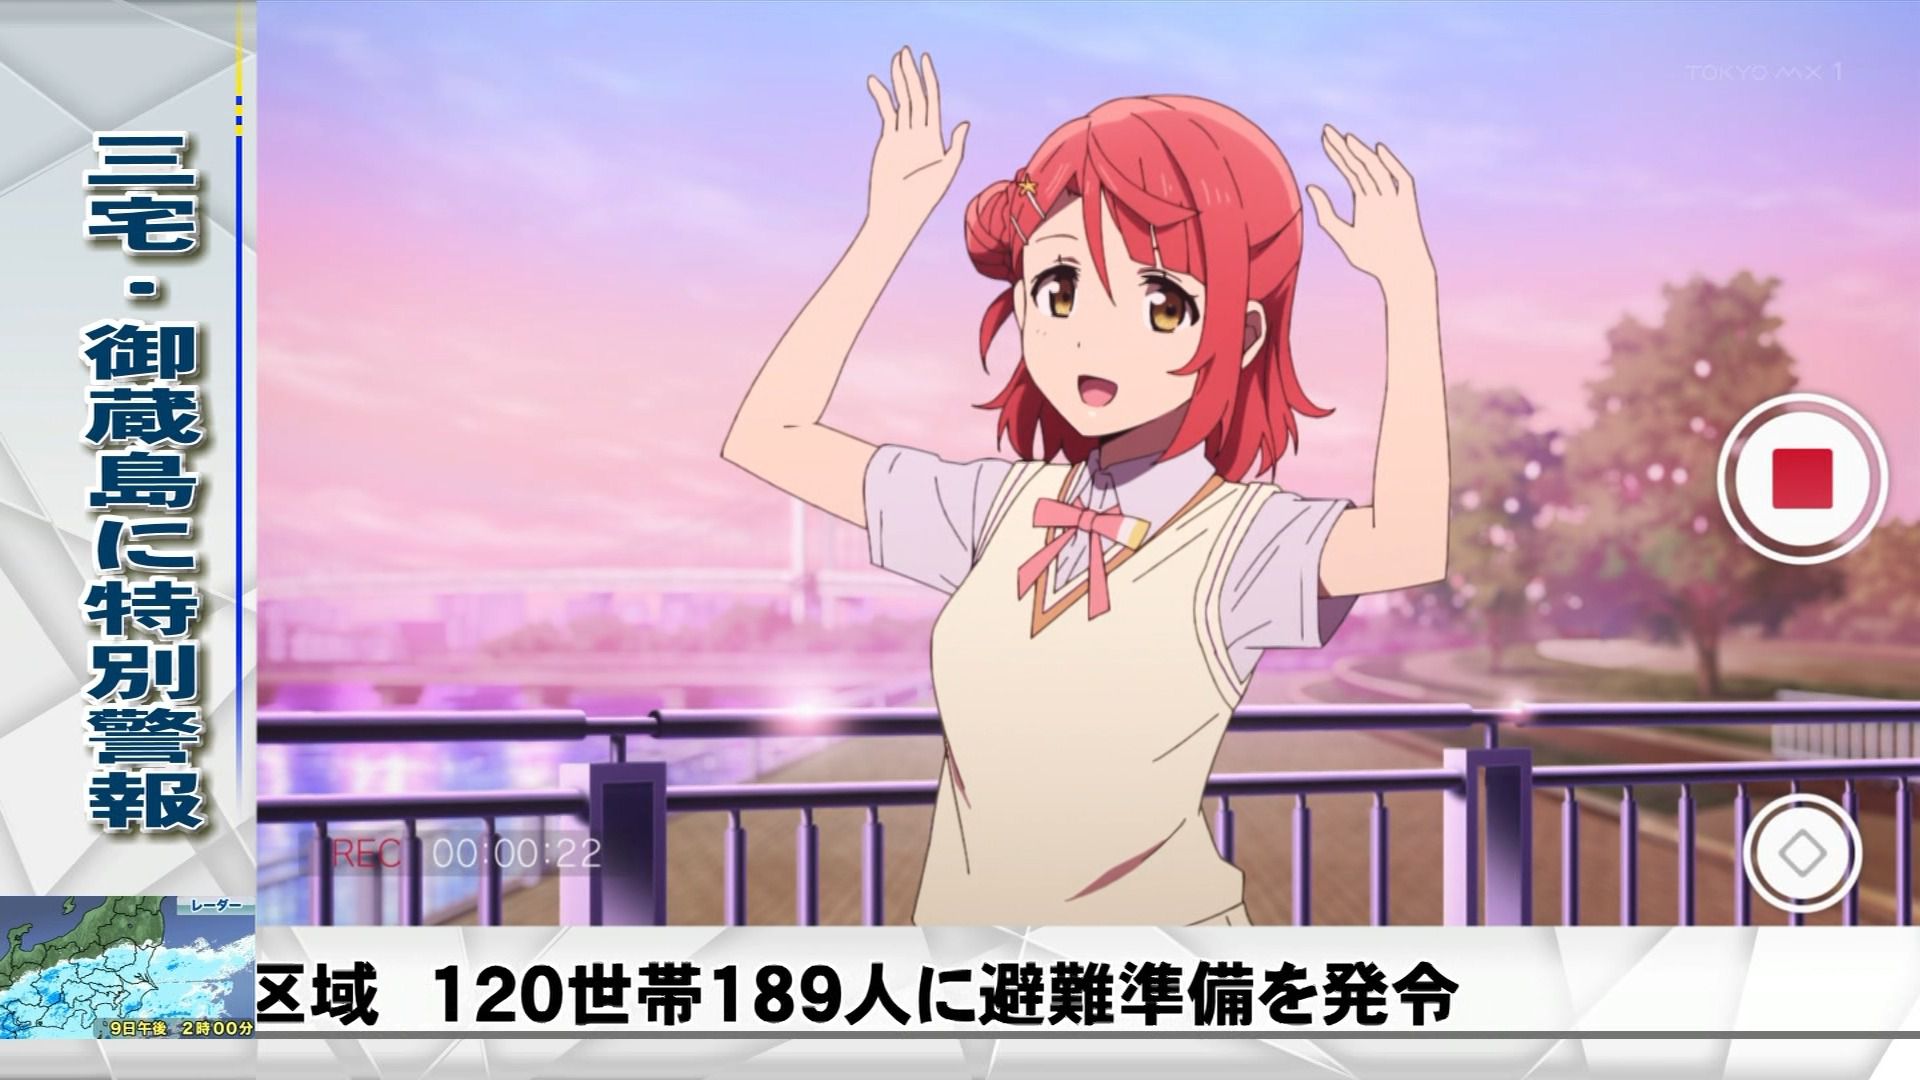 Moe Amusement Park: Love Live! Rainbowgasaki Gakuen School Idol Association" 2 episodes impression. The new character is also buhi power high! Everyone is too cute after all on top! ! 19